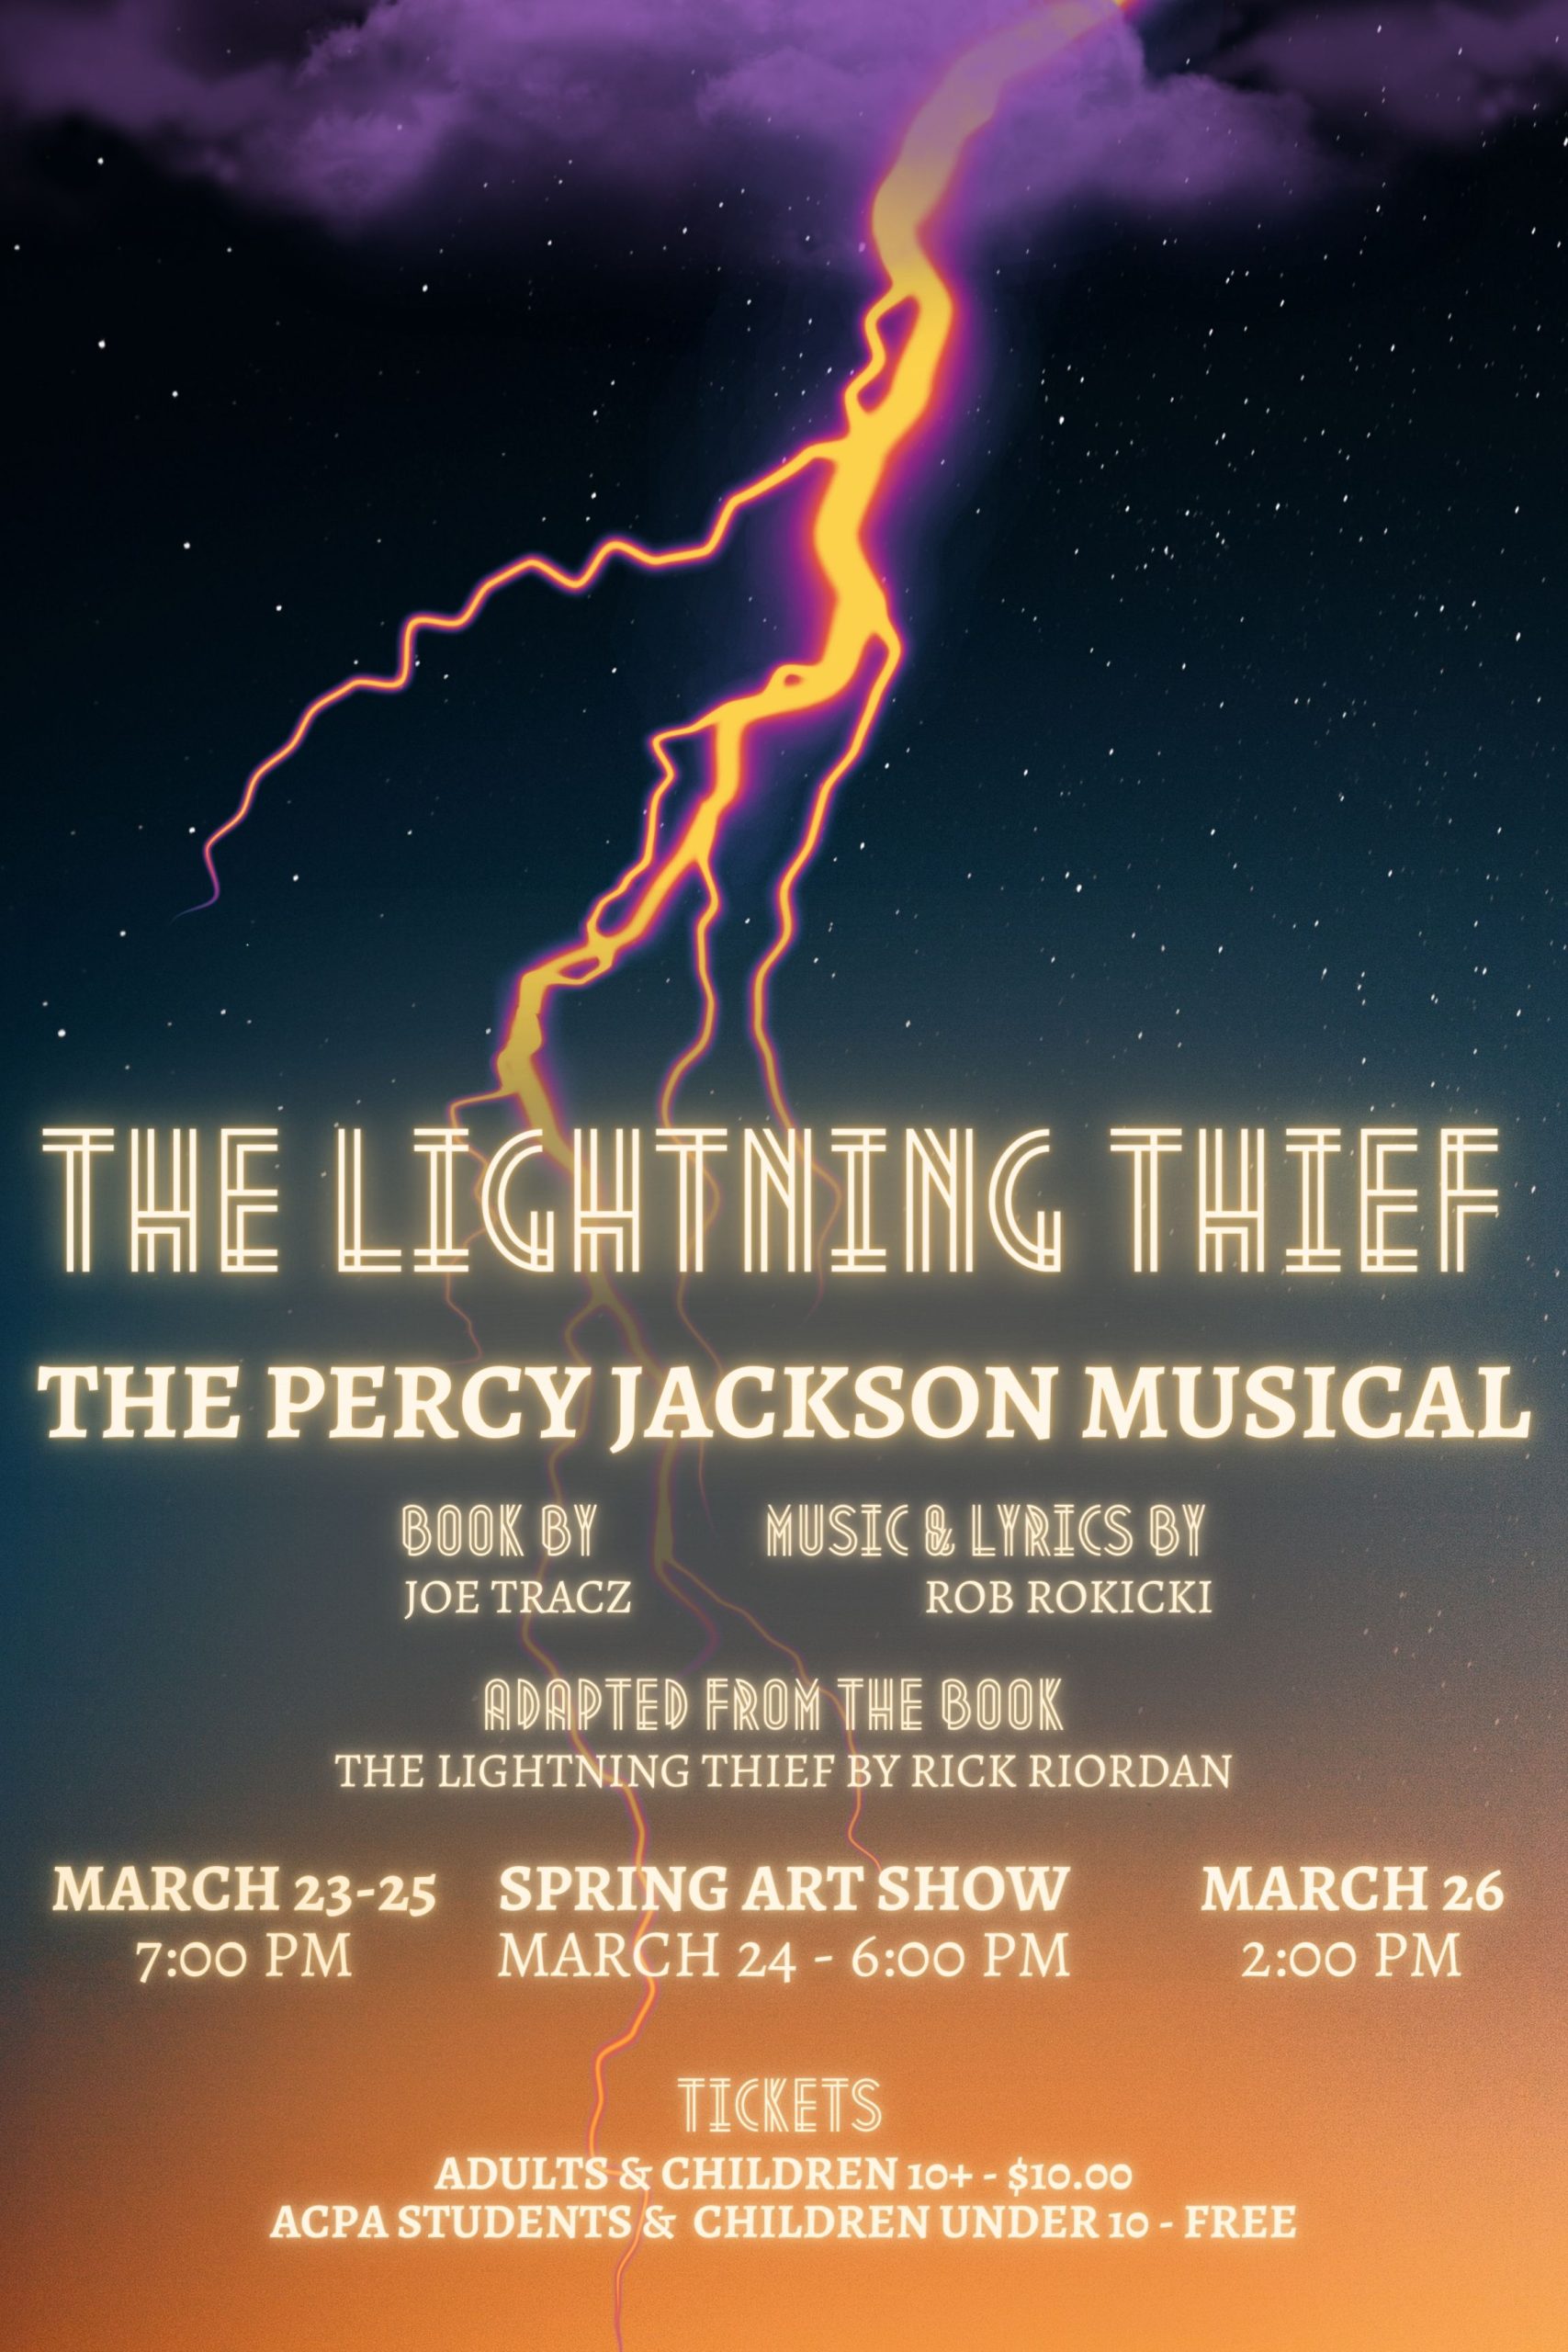 The Lightning Thief The Percy Jackson Musical Arts & College